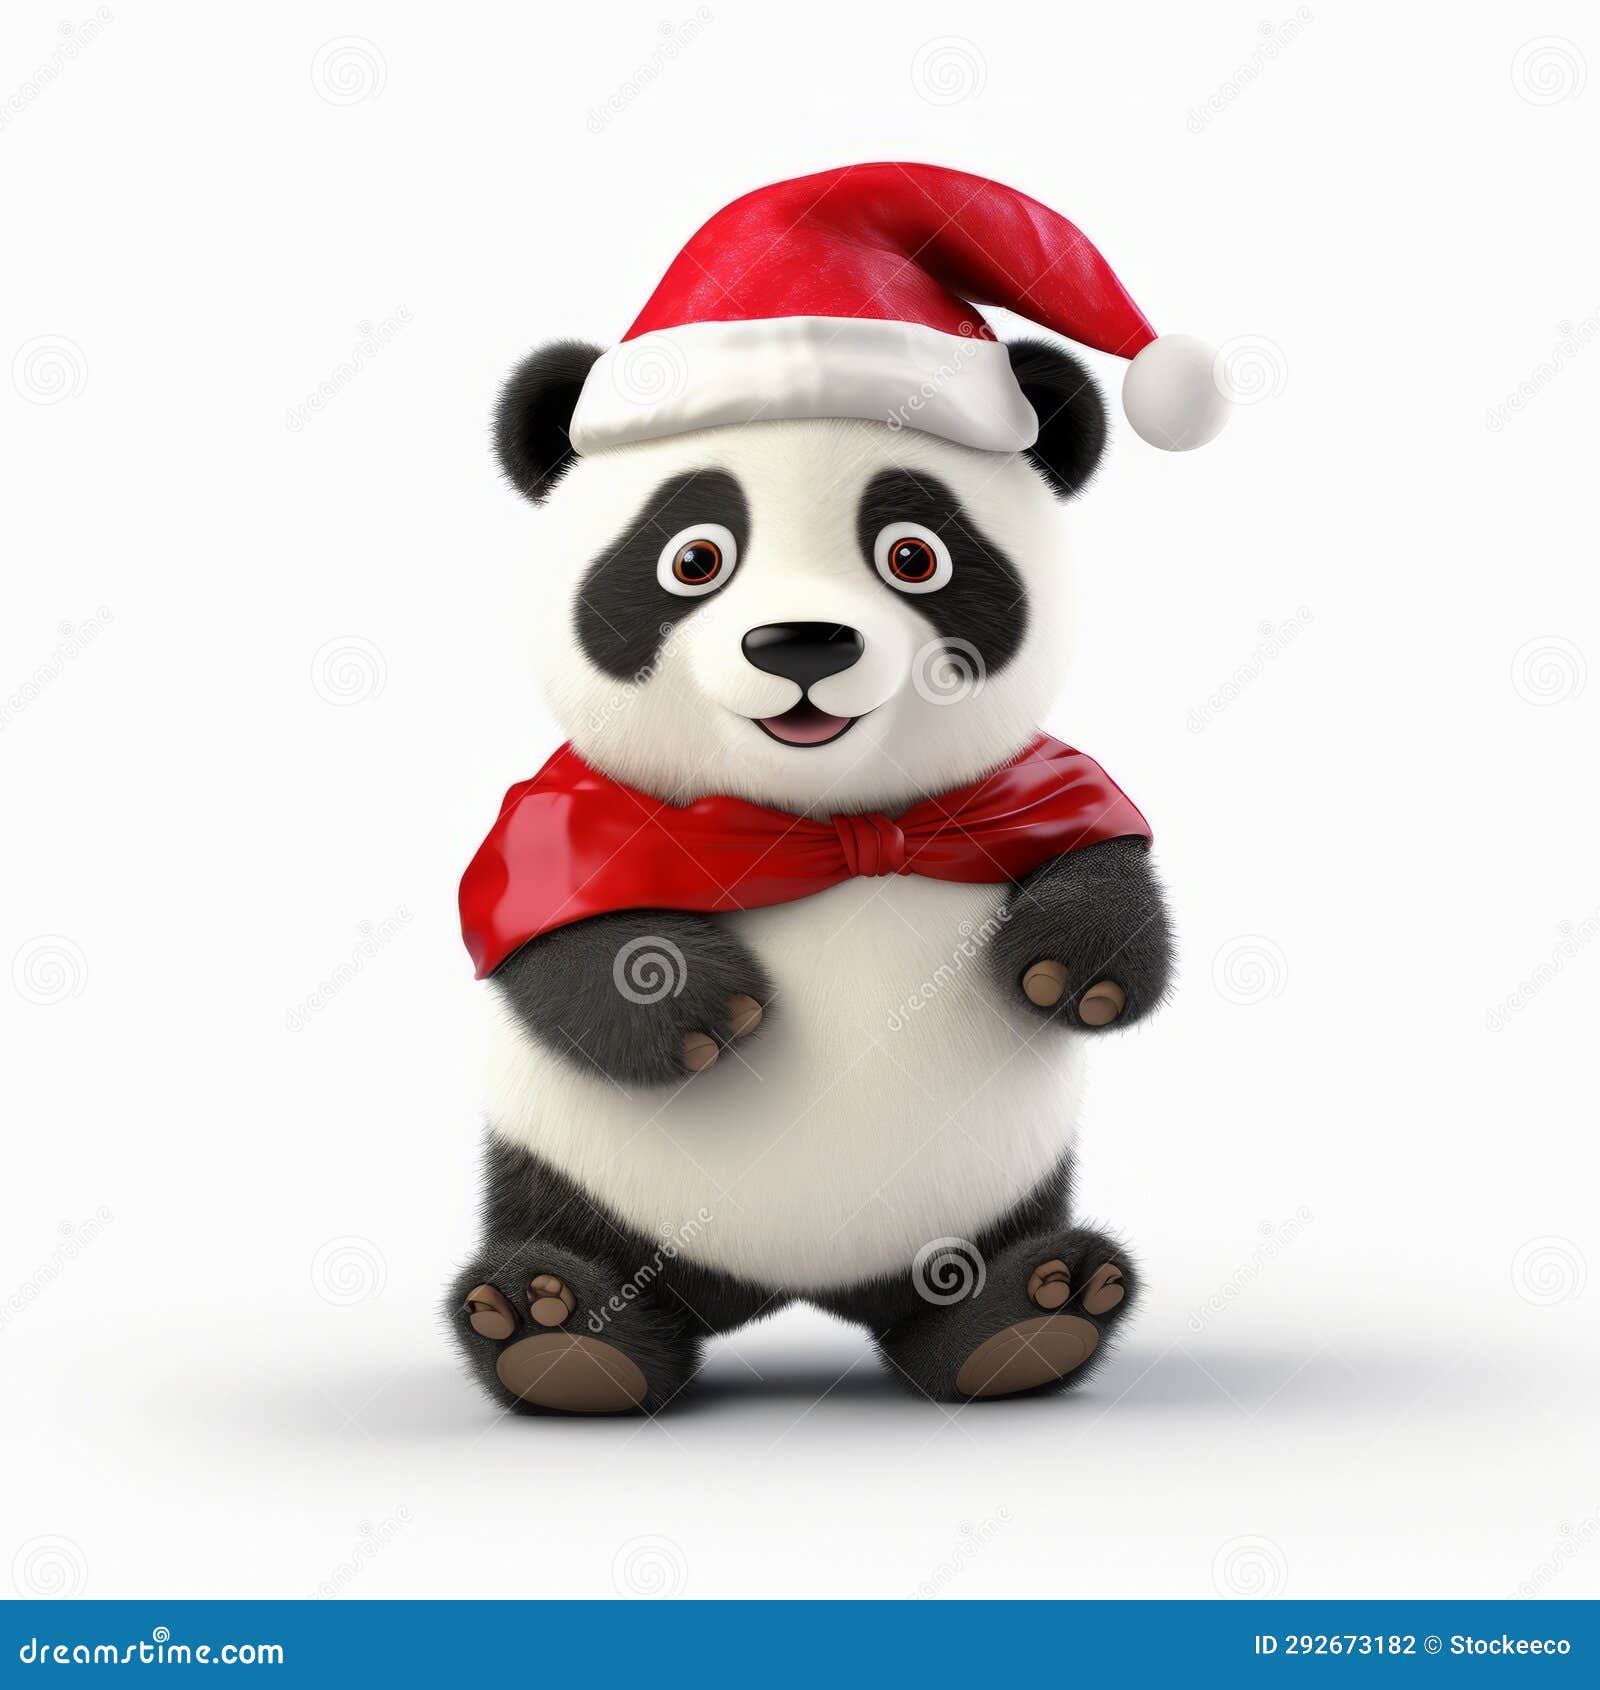 panda christmas bear 3d stock photo with festive chinese new year style